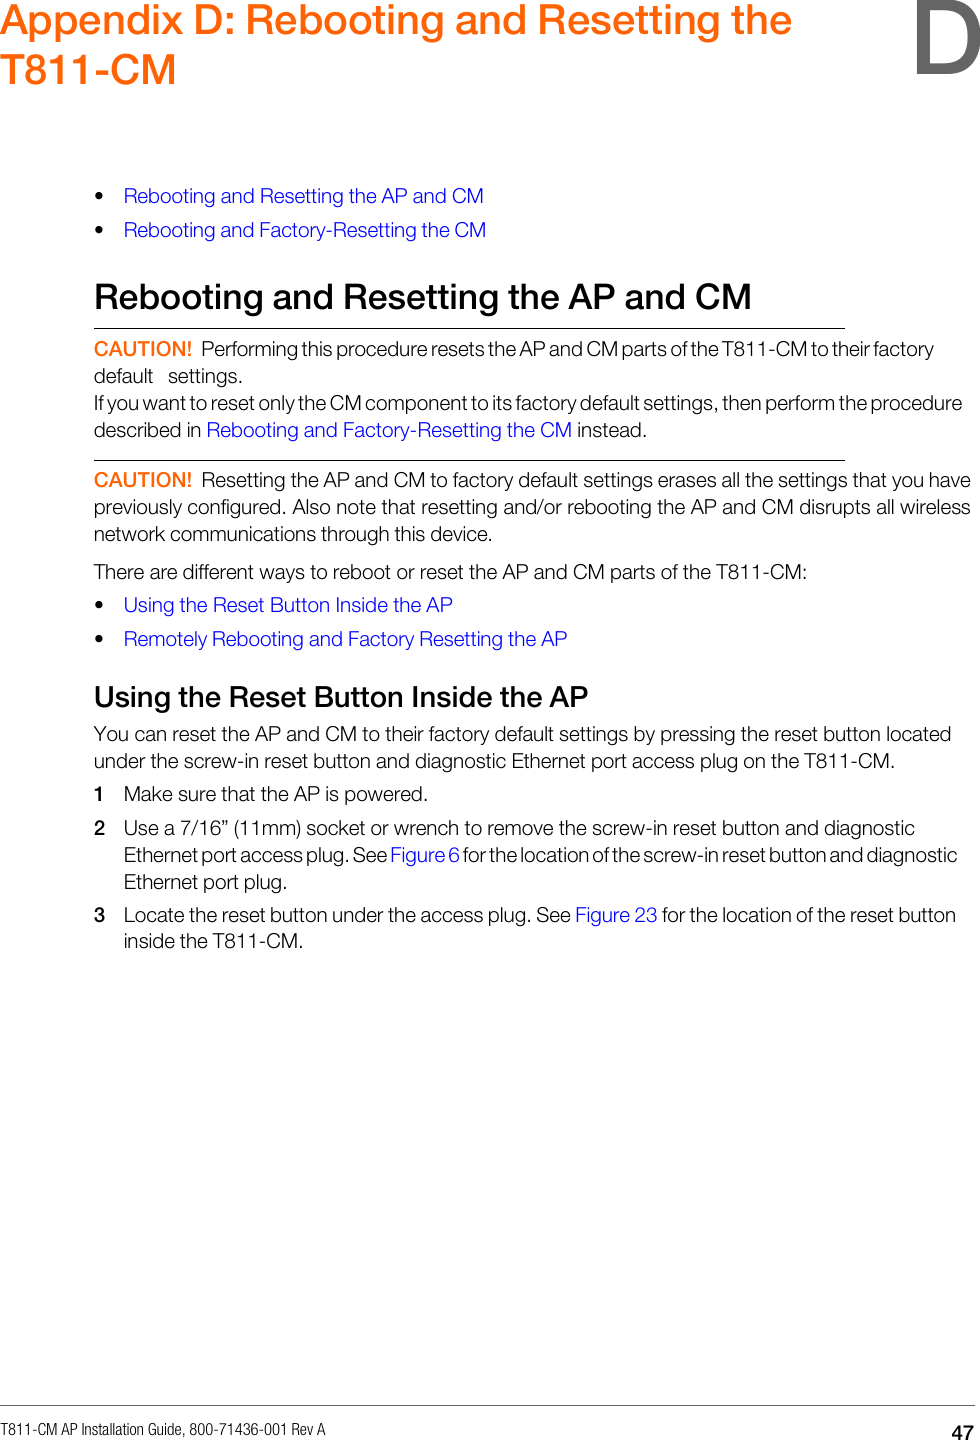 T811-CM AP Installation Guide, 800-71436-001 Rev A  47     Appendix D: Rebooting and Resetting the T811-CM   • Rebooting and Resetting the AP and CM • Rebooting and Factory-Resetting the CM  Rebooting and Resetting the AP and CM   CAUTION! Performing this procedure resets the AP and CM parts of the T811-CM to their factory default settings. If you want to reset only the CM component to its factory default settings, then perform the procedure described in Rebooting and Factory-Resetting the CM instead.   CAUTION! Resetting the AP and CM to factory default settings erases all the settings that you have previously configured. Also note that resetting and/or rebooting the AP and CM disrupts all wireless network communications through this device. There are different ways to reboot or reset the AP and CM parts of the T811-CM: • Using the Reset Button Inside the AP • Remotely Rebooting and Factory Resetting the AP  Using the Reset Button Inside the AP You can reset the AP and CM to their factory default settings by pressing the reset button located under the screw-in reset button and diagnostic Ethernet port access plug on the T811-CM. 1 Make sure that the AP is powered. 2 Use a 7/16” (11mm) socket or wrench to remove the screw-in reset button and diagnostic Ethernet port access plug. See Figure 6 for the location of the screw-in reset button and diagnostic Ethernet port plug. 3 Locate the reset button under the access plug. See Figure 23 for the location of the reset button inside the T811-CM. D 